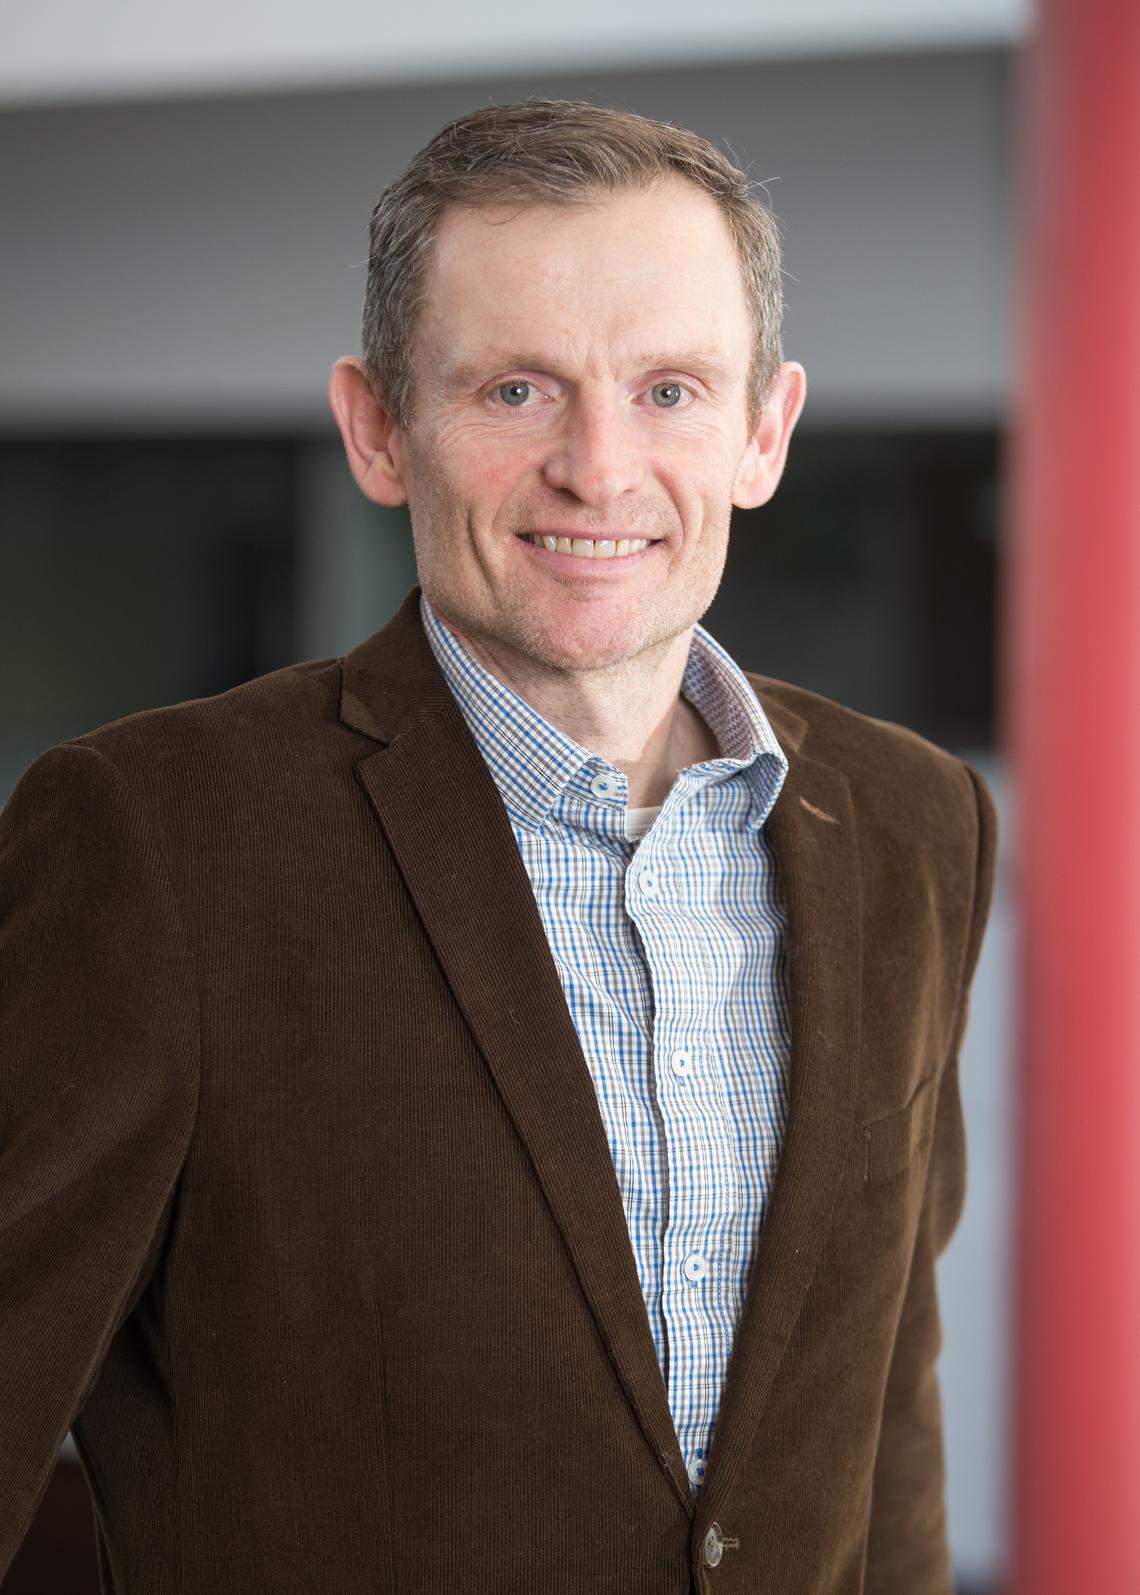 Nick Holt, Dean, Faculty of Kinesiology at the University of Calgary